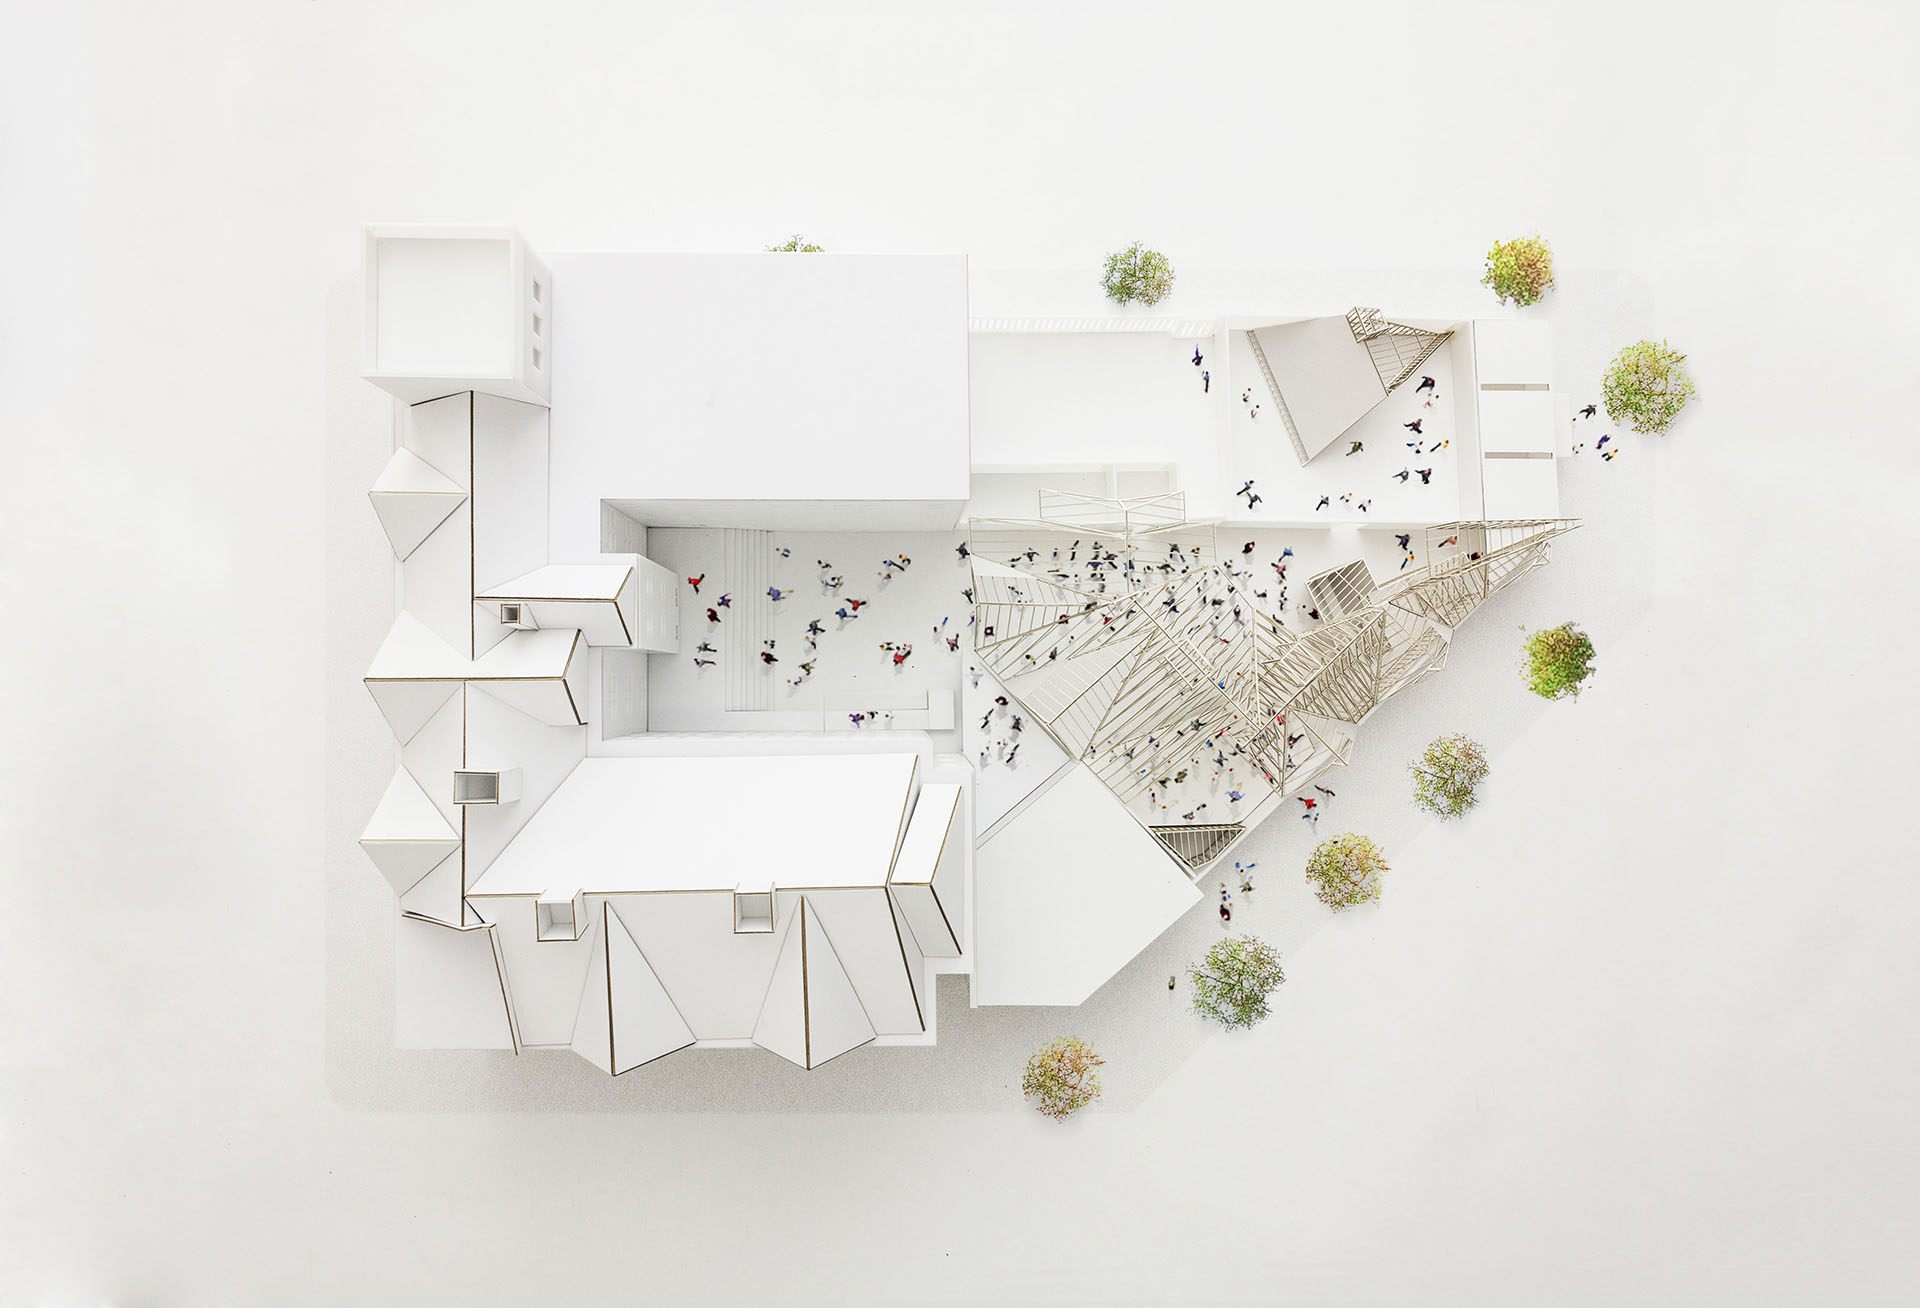 Roof Deck (model photograph), MoMA PS1 Young Architects Program, 2015, New York